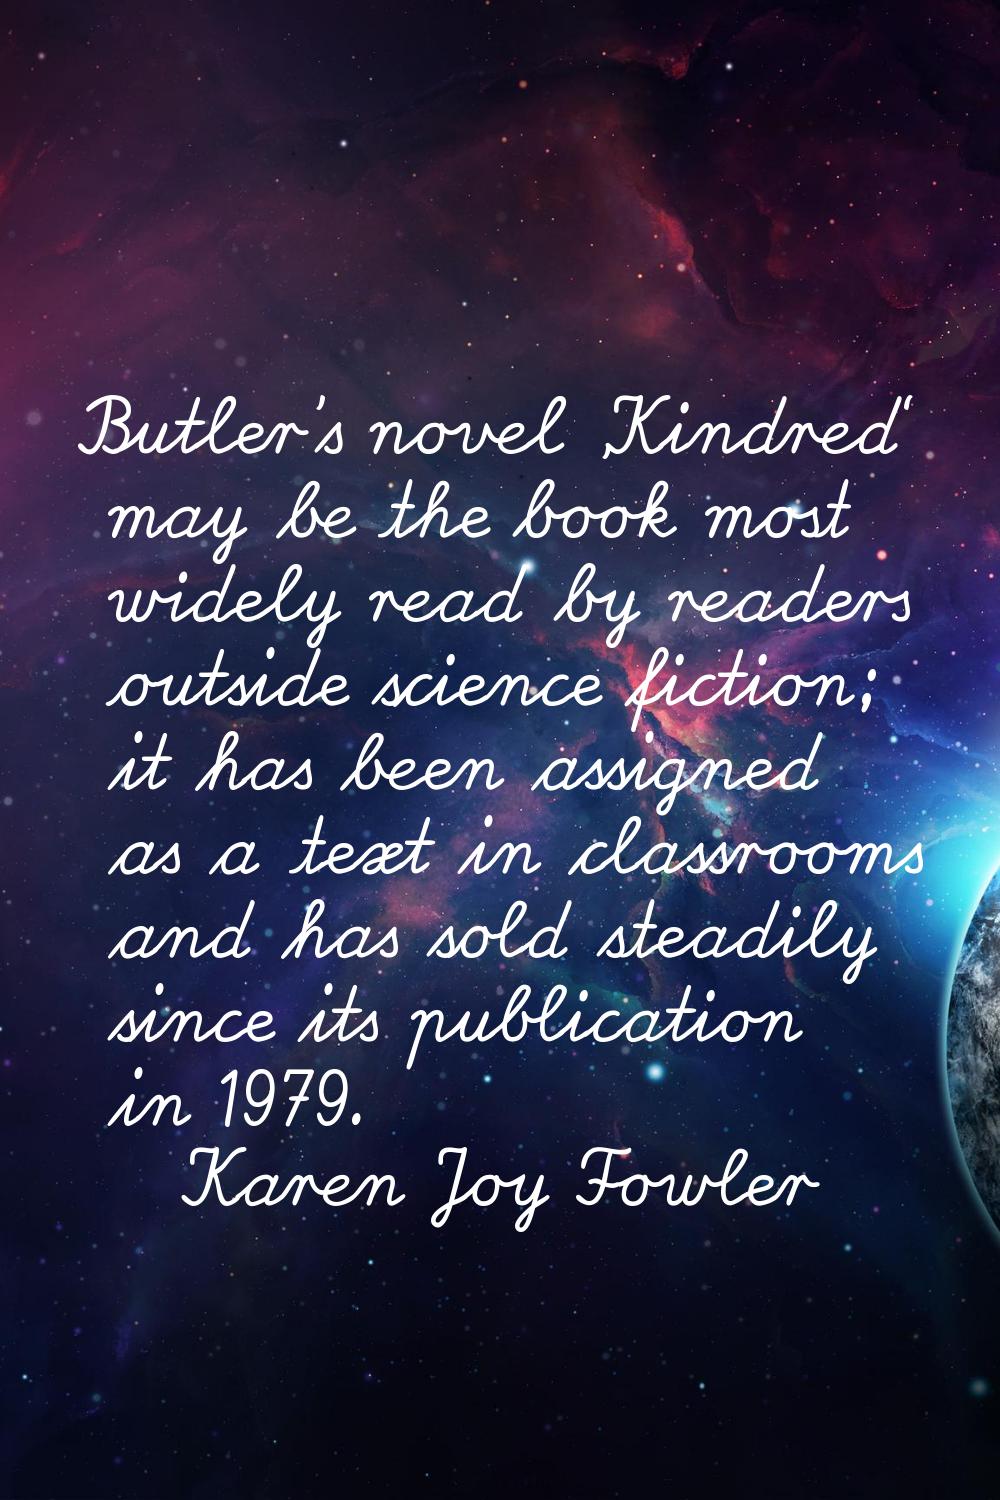 Butler's novel 'Kindred' may be the book most widely read by readers outside science fiction; it ha